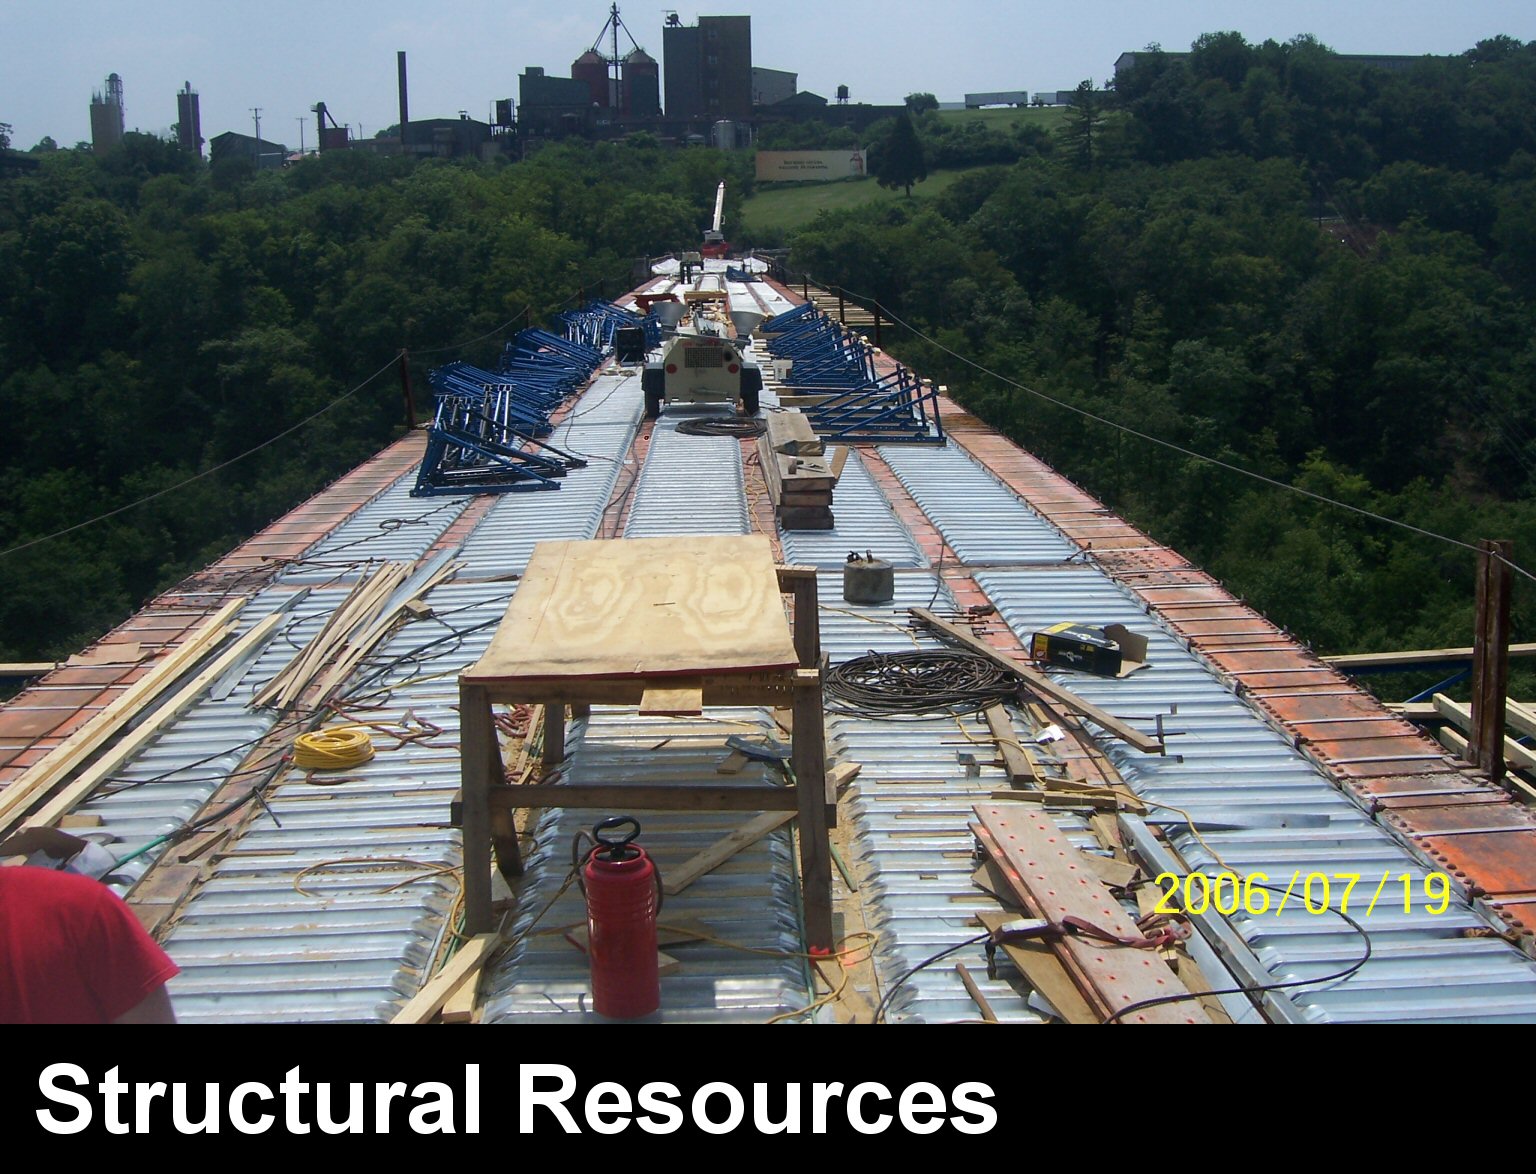 Link to the Structural Resources page